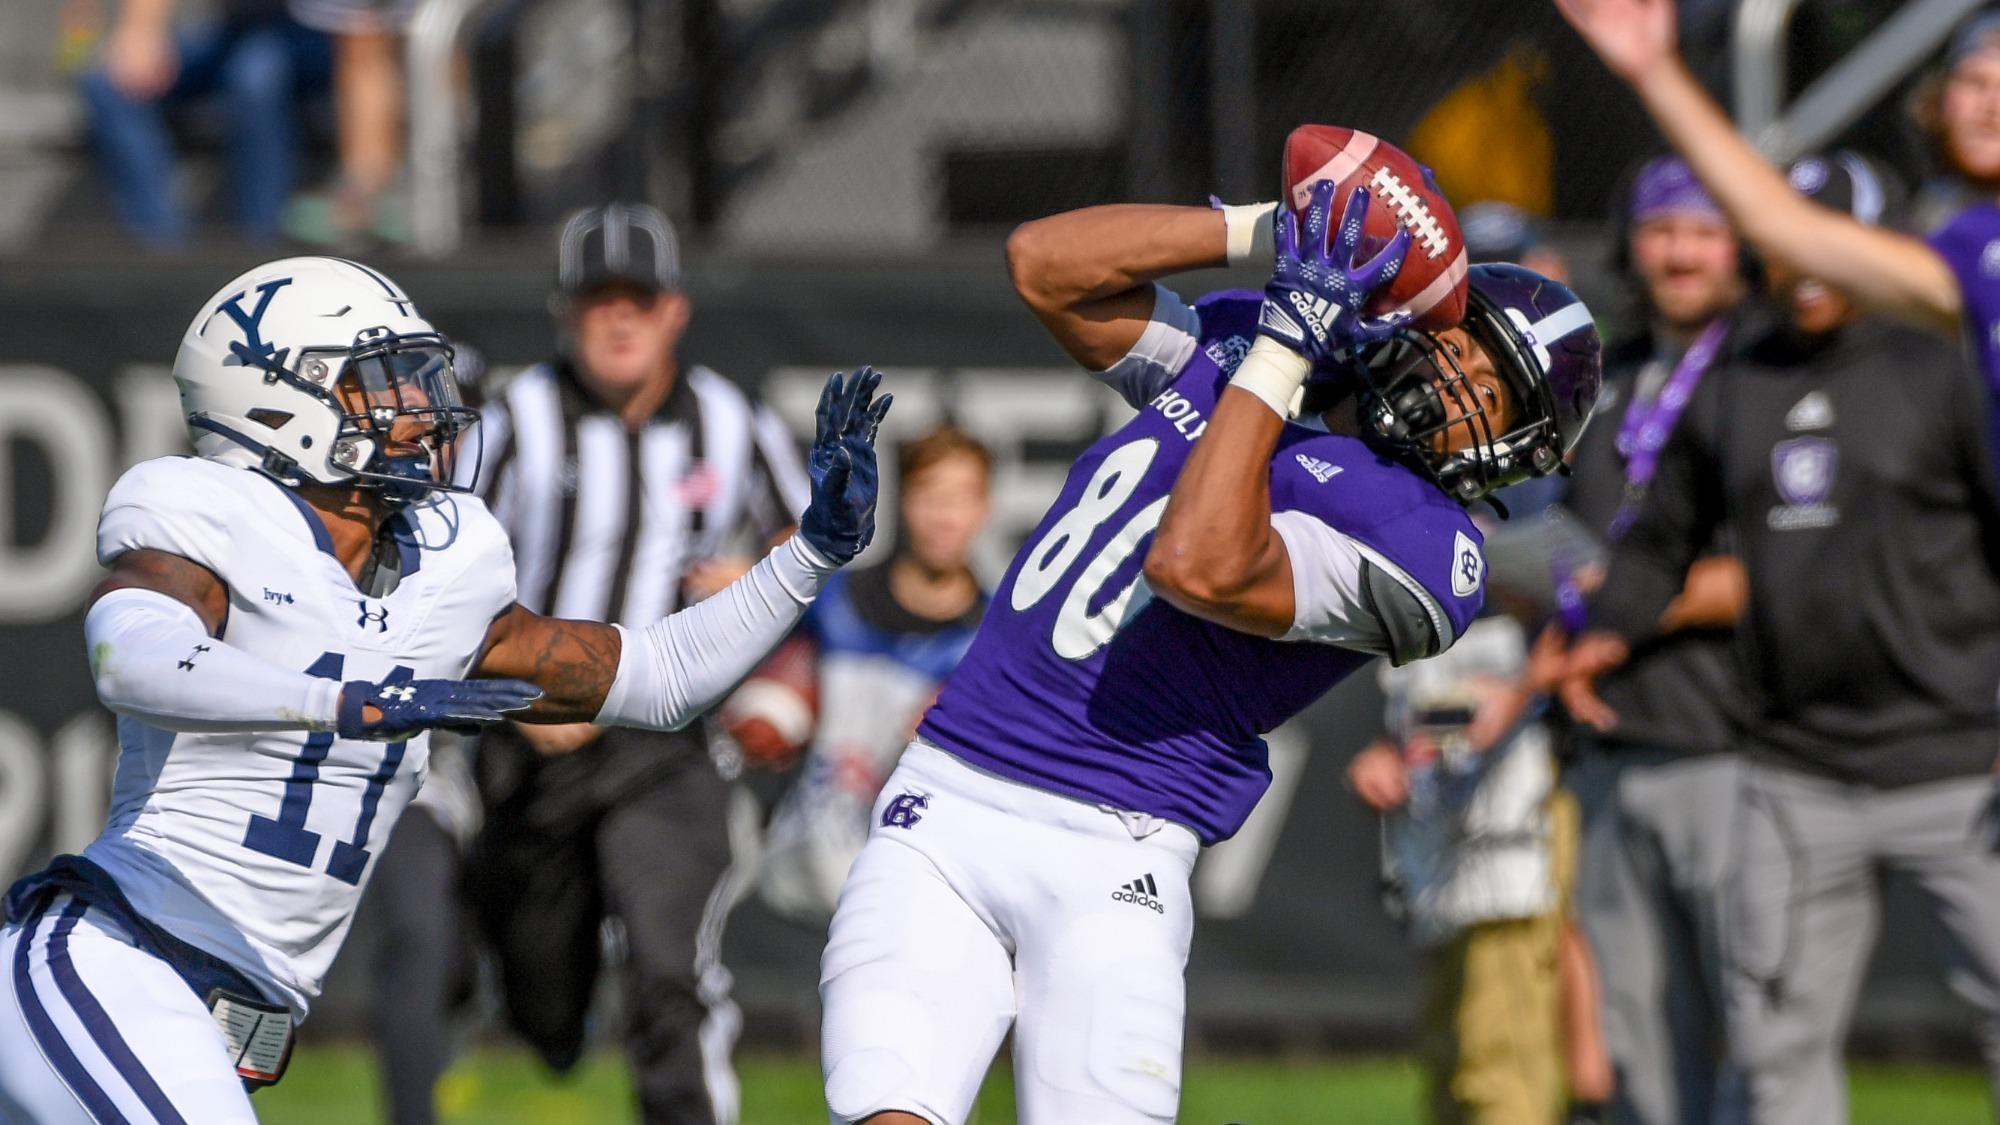 Jalen Coker has been a very prolific receiver for Holy Cross, exhibiting good route running ability and above-average hands.  Hula Bowl scout Brinson Bagley breaks down Coker as an NFL Prospect in his report.